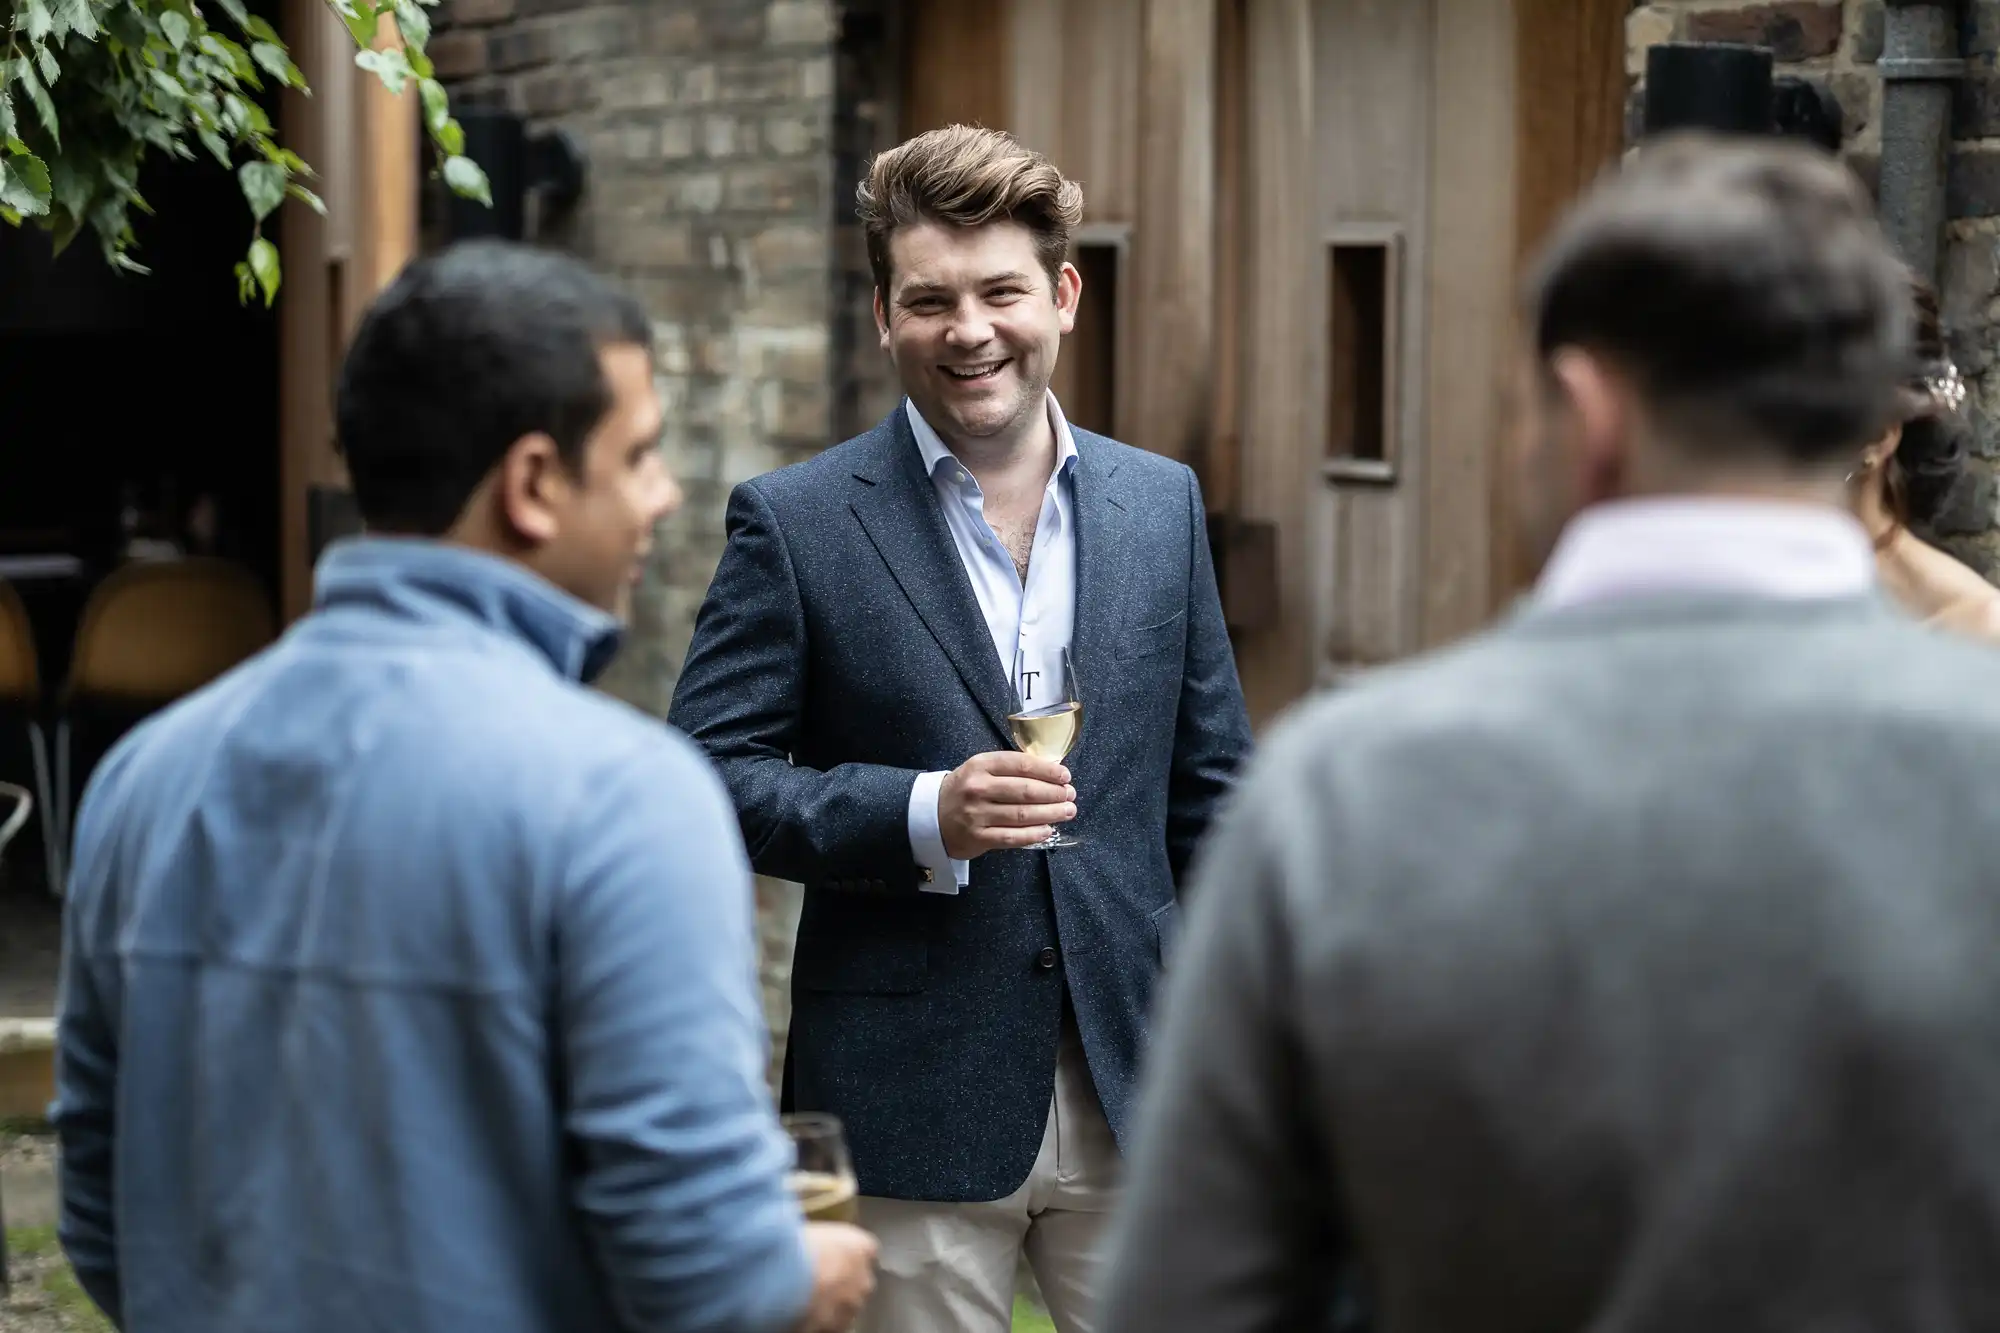 A smiling man in a blue blazer holding a wine glass while conversing with two other men at an outdoor gathering.